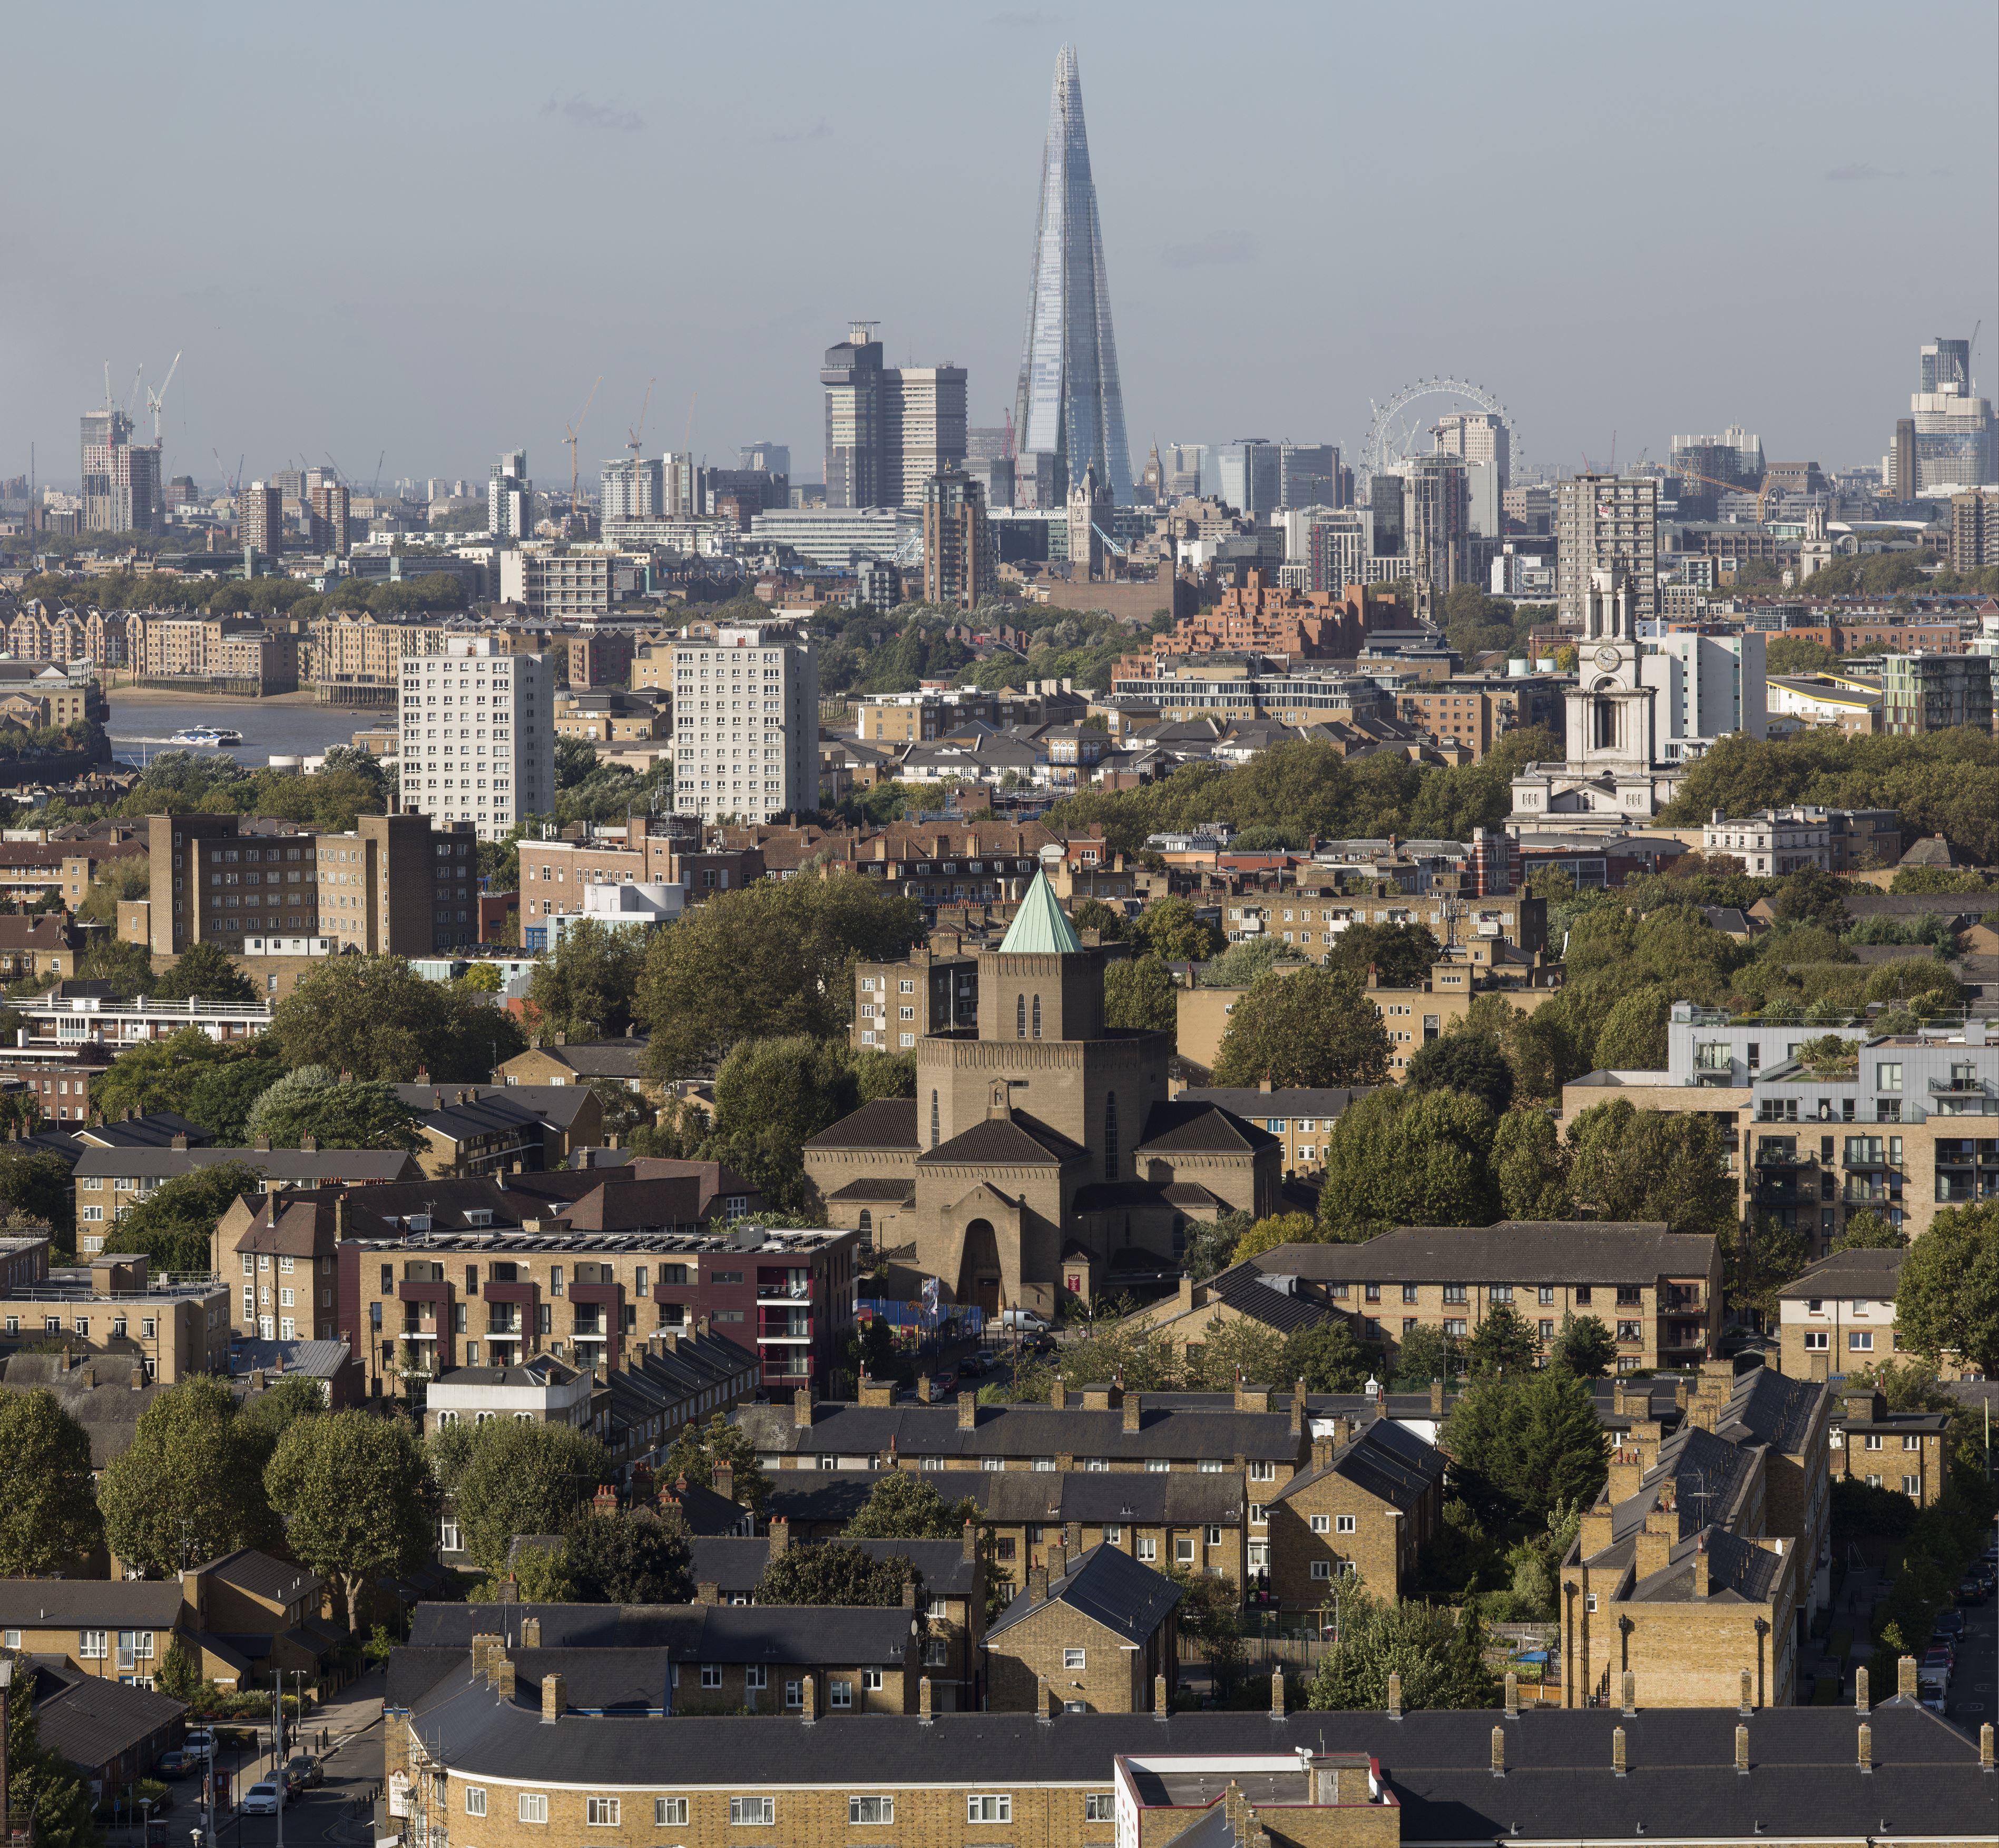 View across London rooftops to the central London skyline beyond.